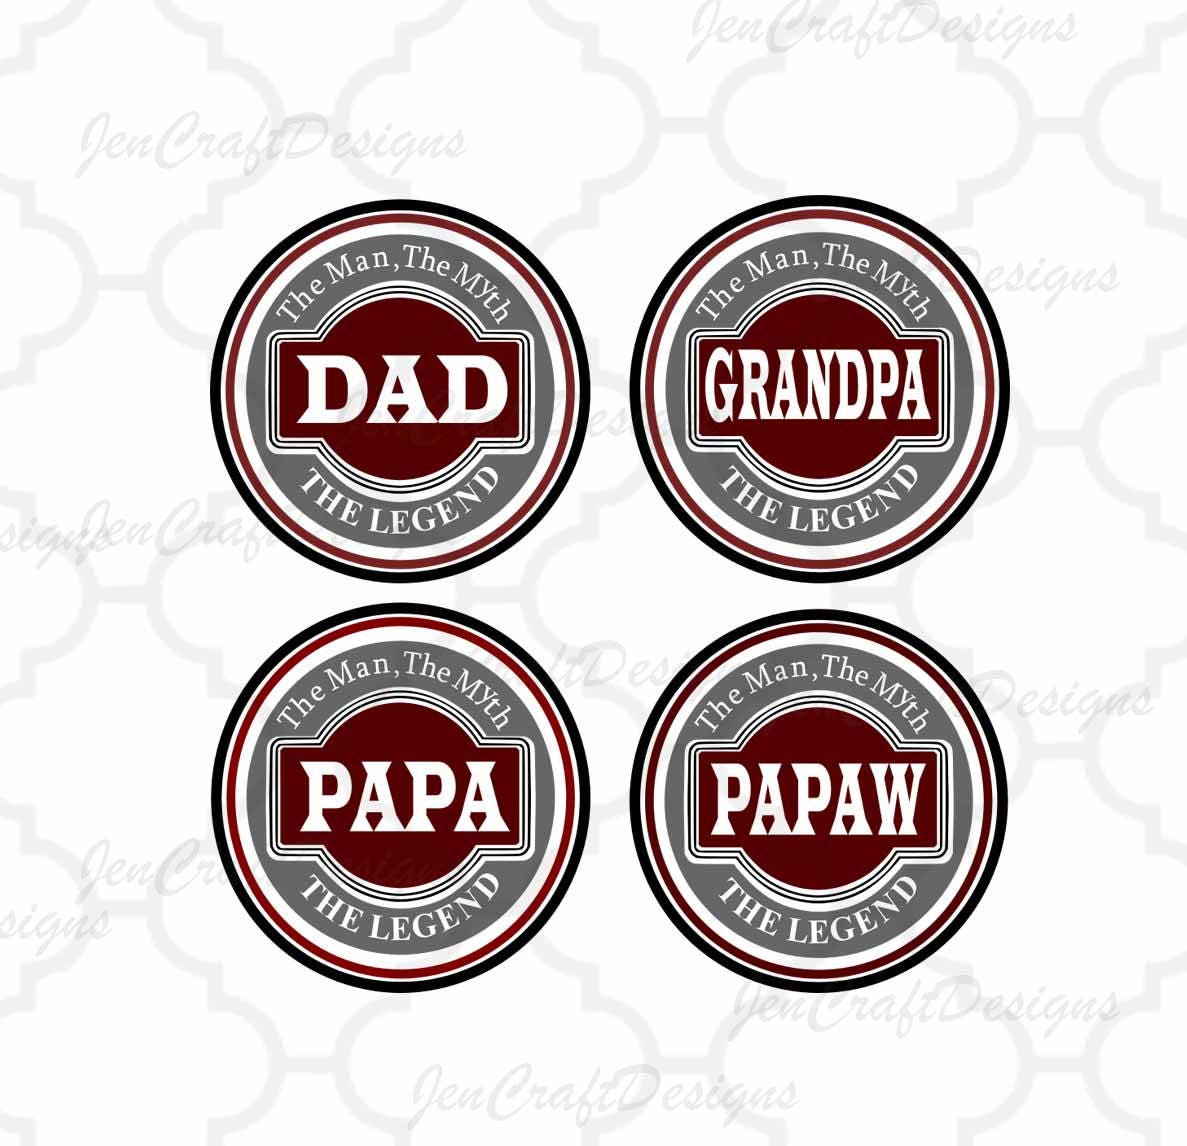 Download The Legend Fathers Day SVG, Fathers Day Shirt, Gift, Daddy,SVG,DXF,Ai,Jpg,Eps Vector Art, Cricut ...